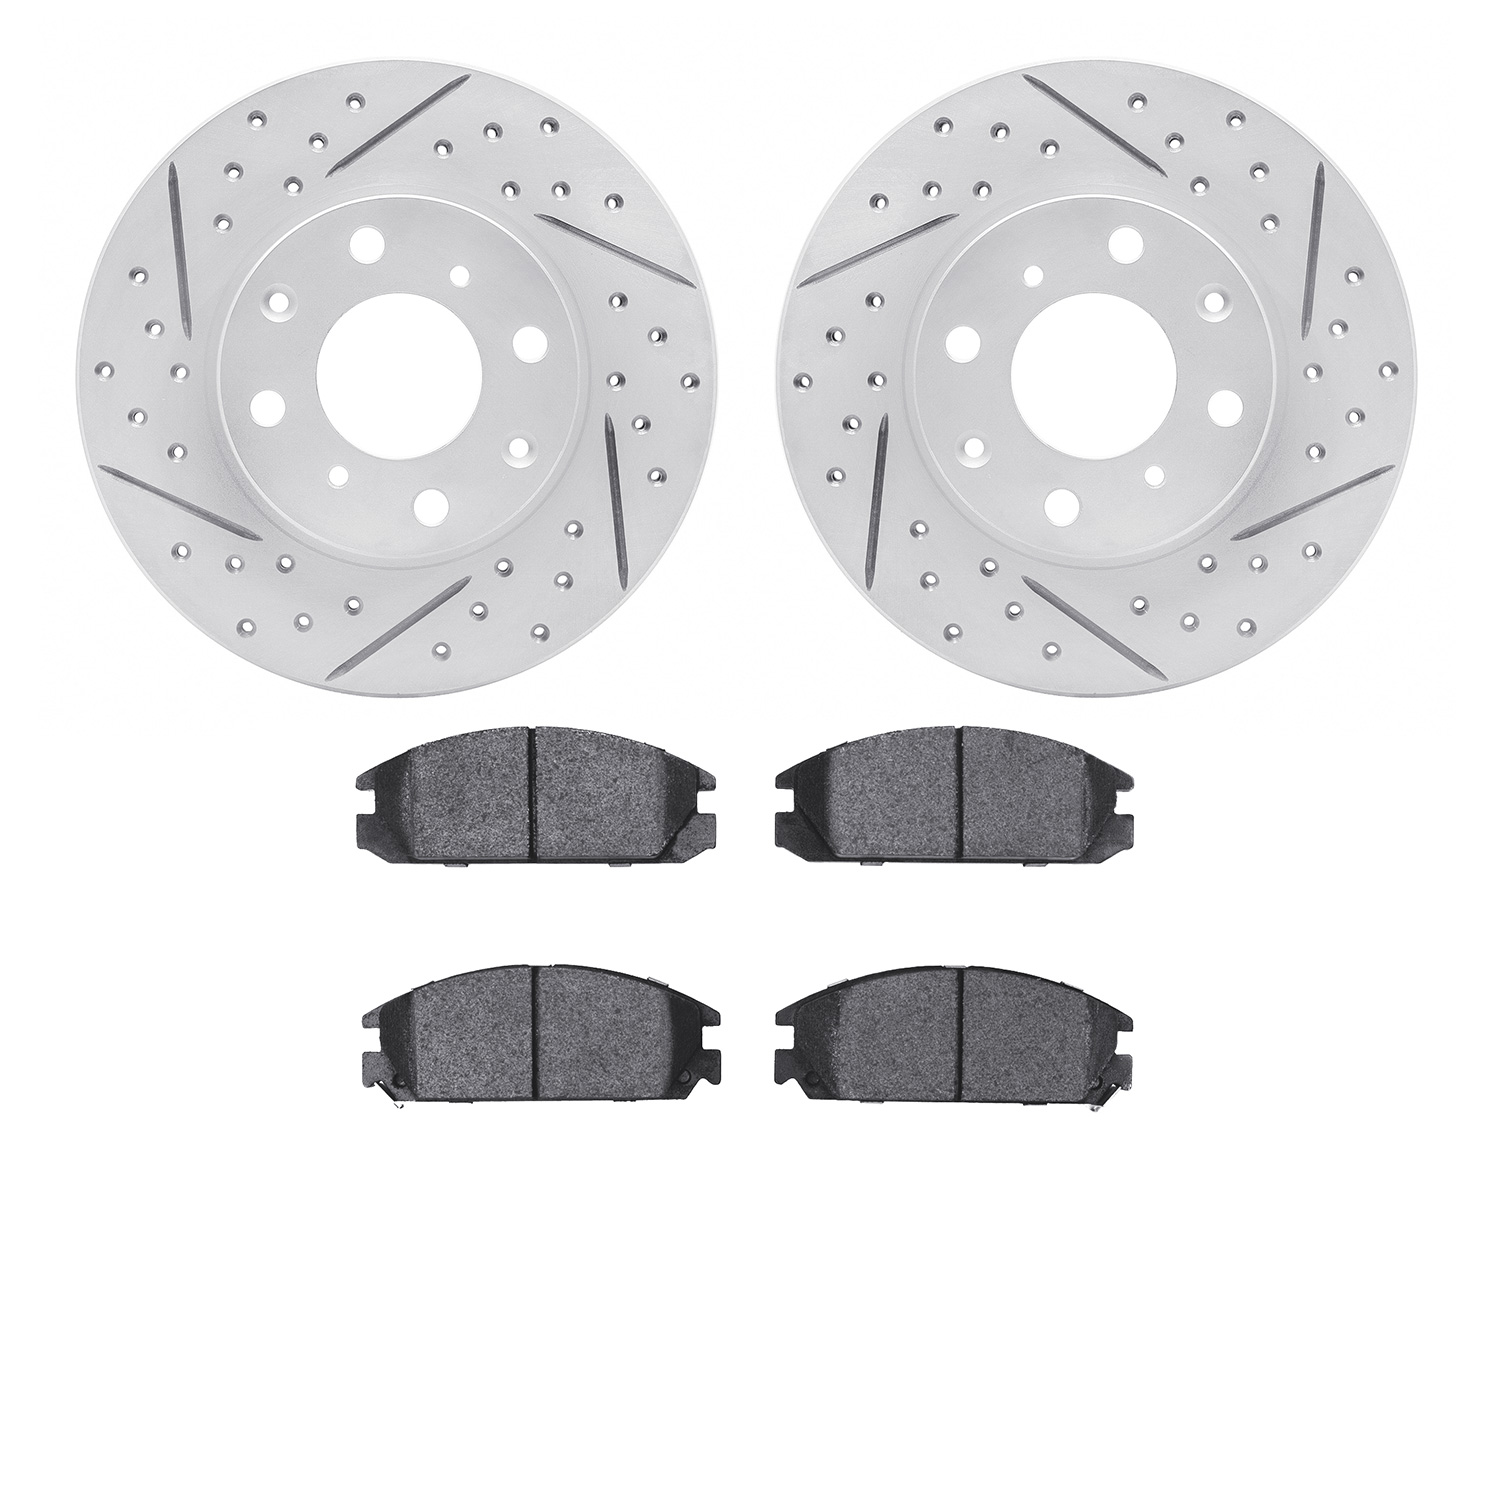 2502-59003 Geoperformance Drilled/Slotted Rotors w/5000 Advanced Brake Pads Kit, 1986-1989 Acura/Honda, Position: Front